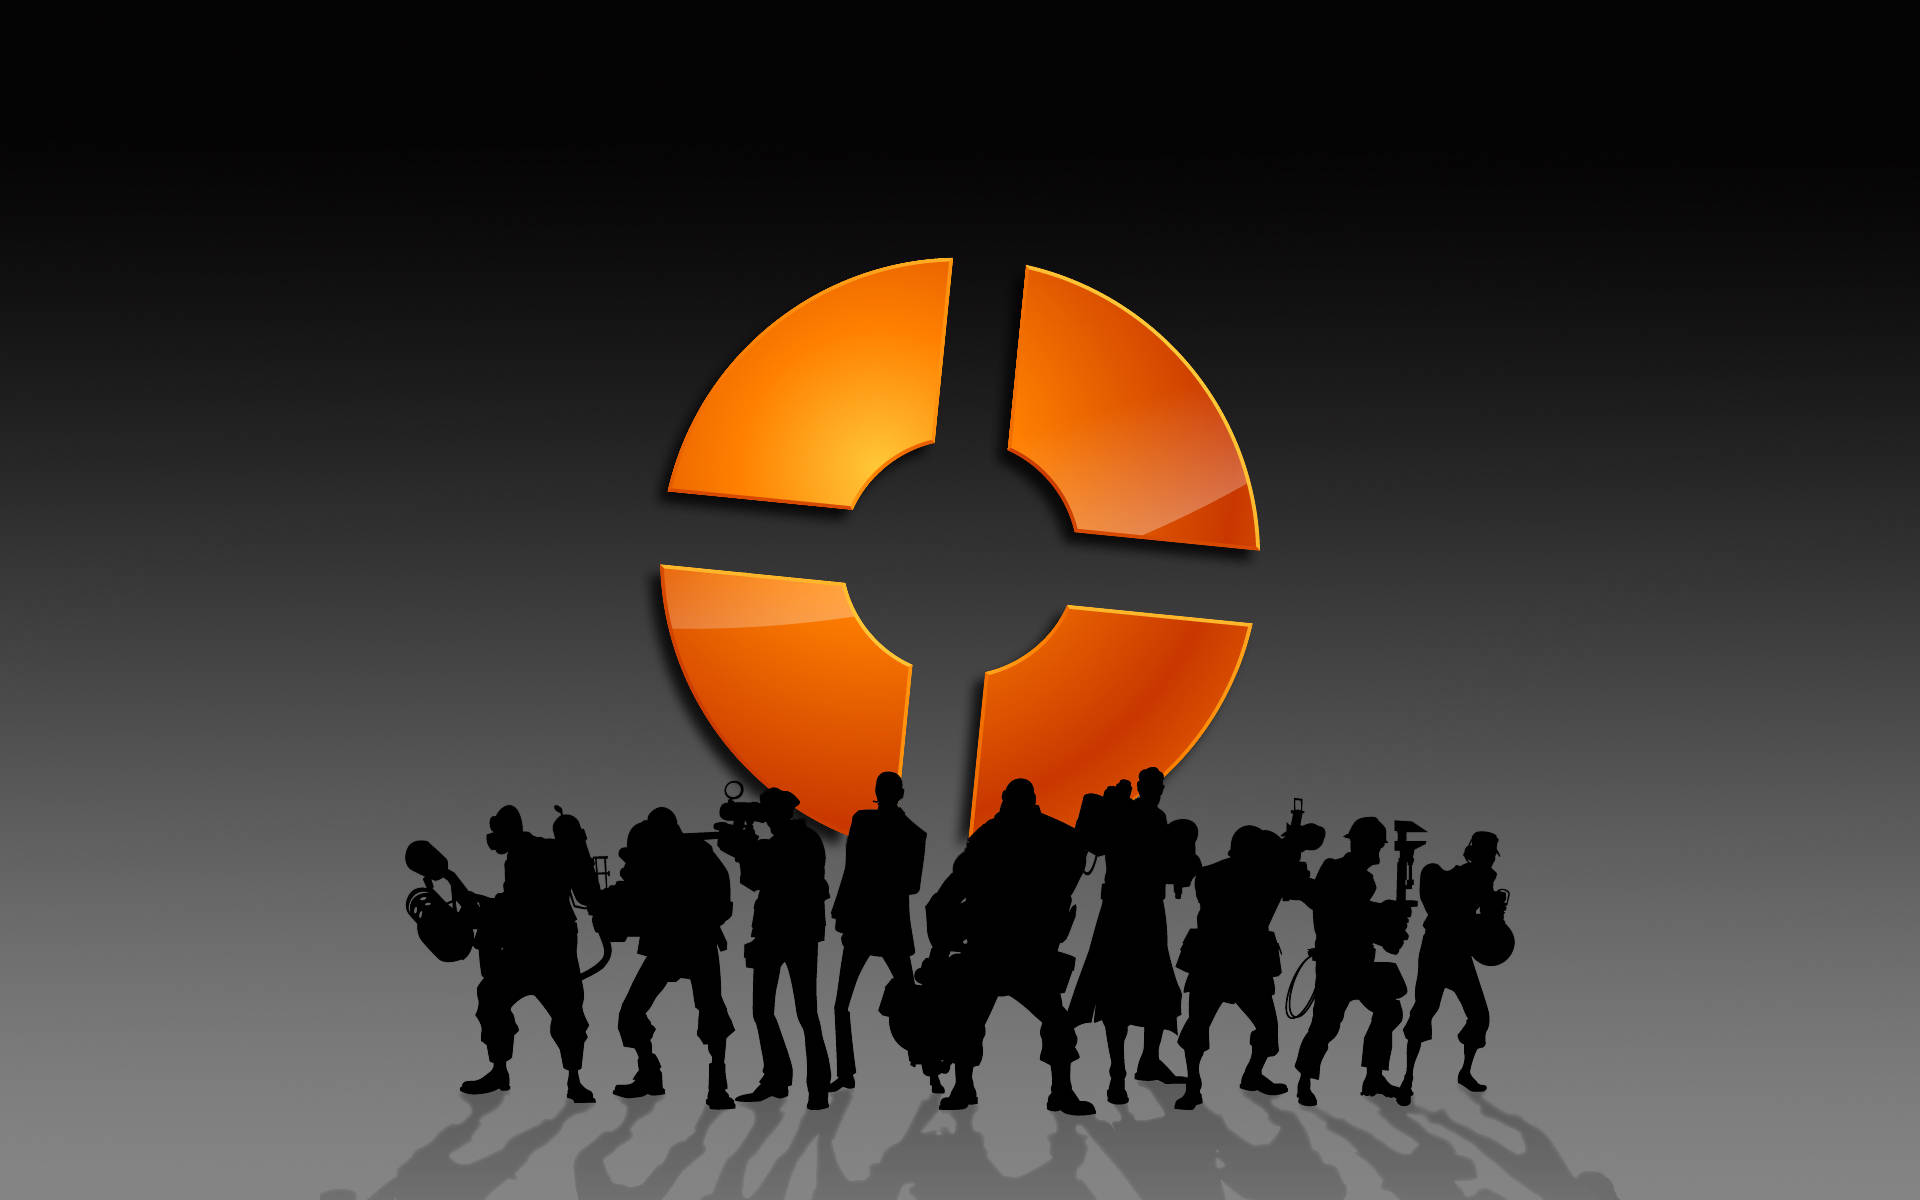 Team Fortress 2 Logo And Silhouettes